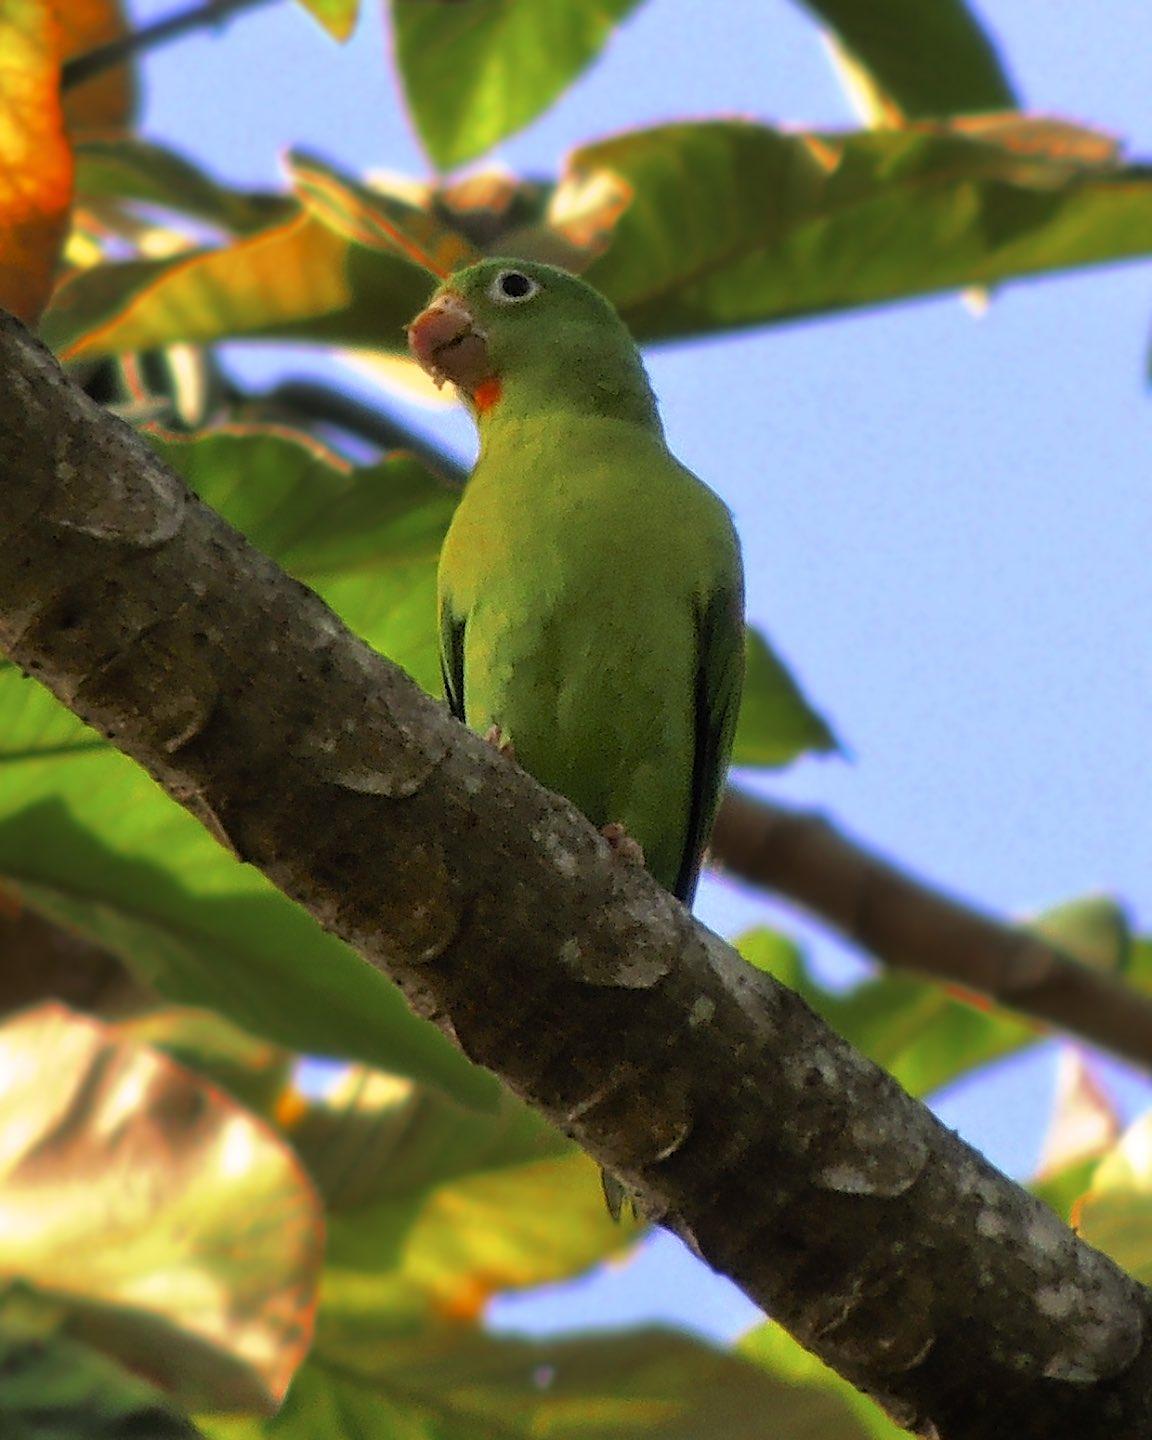 Orange-chinned Parakeet Photo by Andres Duarte